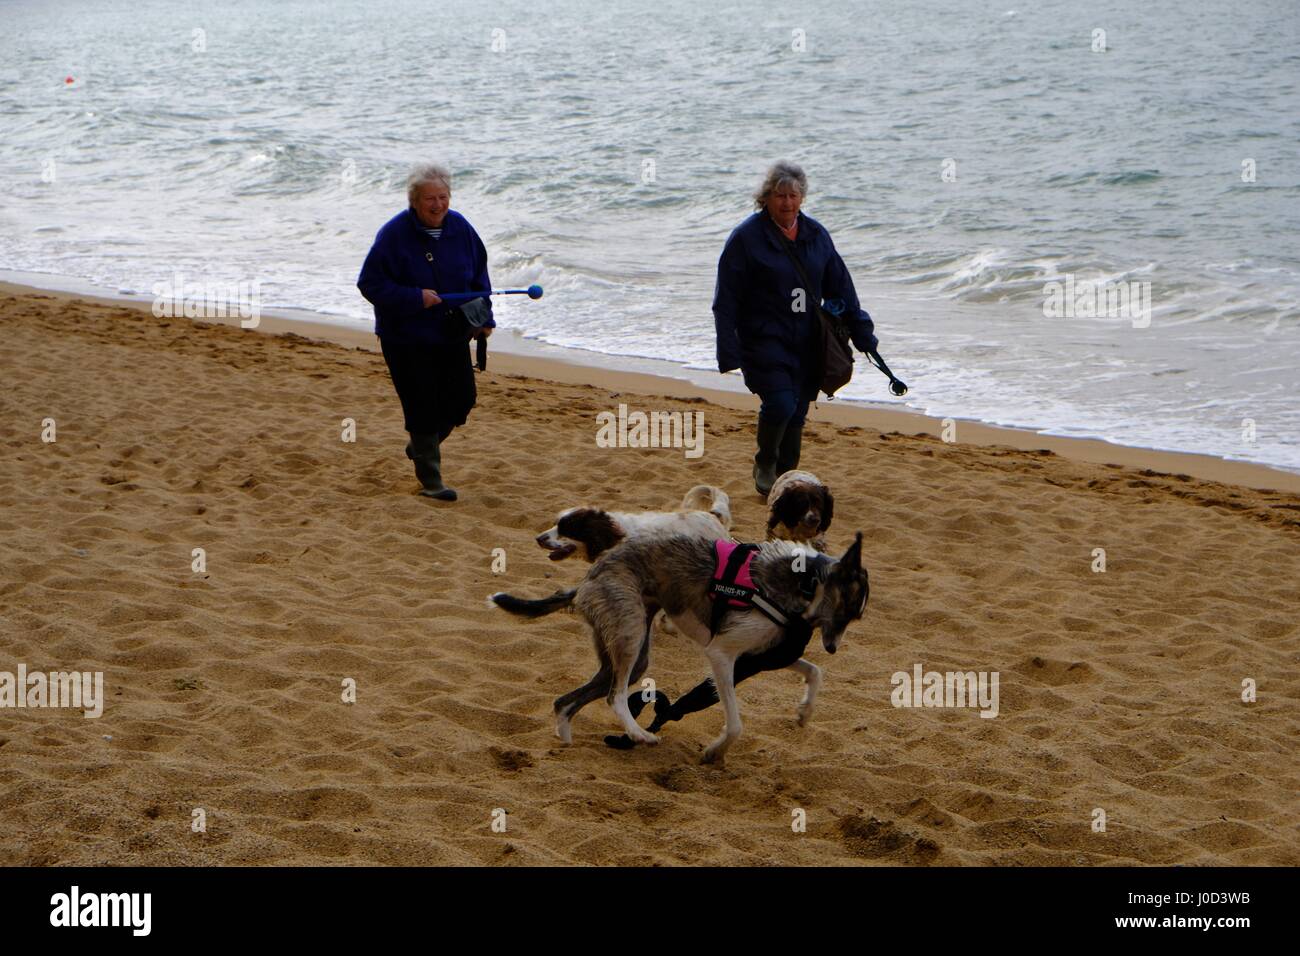 West Bay, Dorset, UK. 12th Apr, 2017. Early morning dog walkers wrap up warm and enjoy dramatic clouds over West Bay as the morning temperature drops on the Dorset coast. Credit: Tom Corban/Alamy Live News Stock Photo